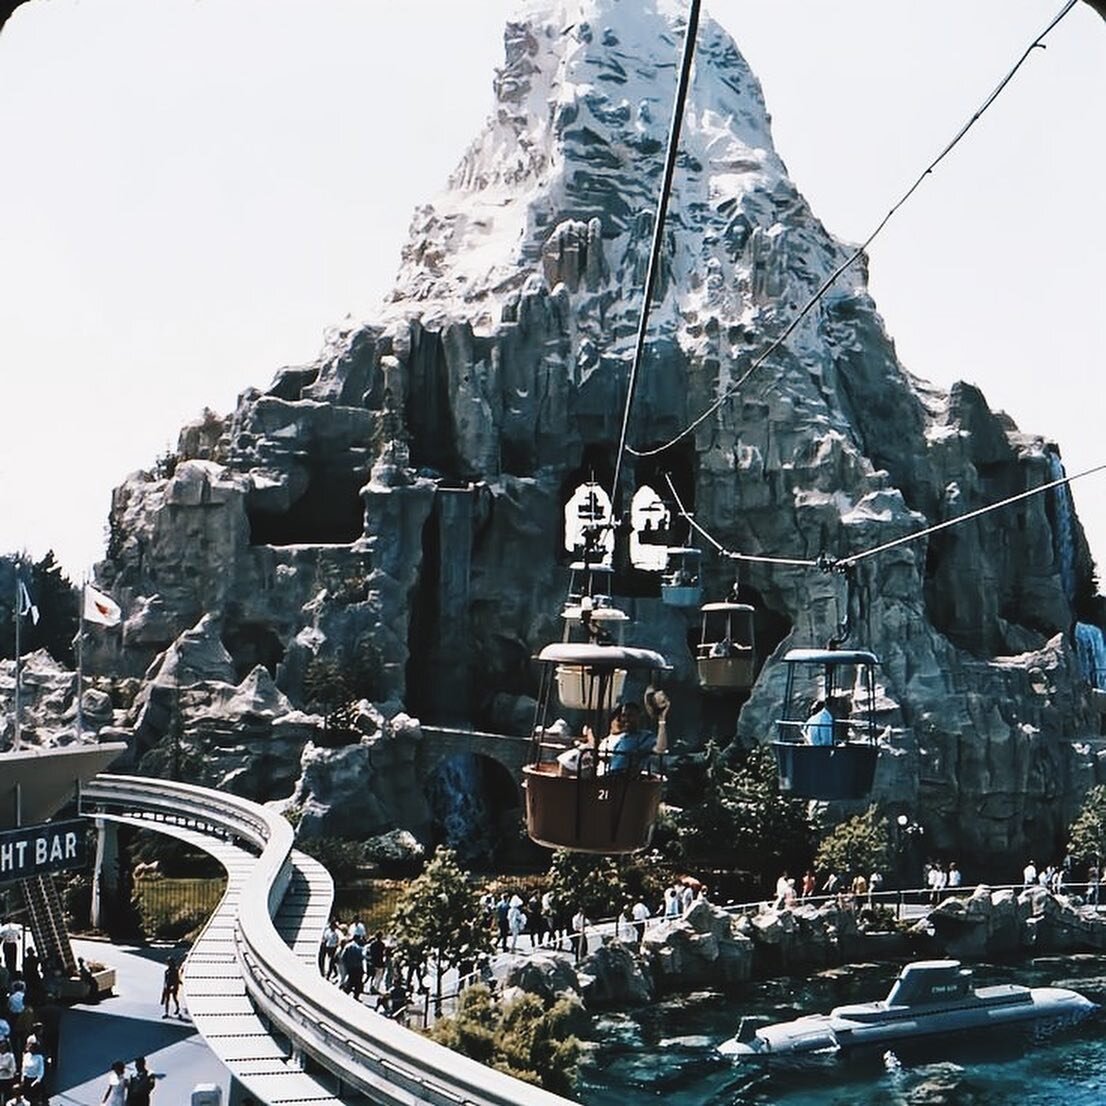 New post is up: &ldquo;E-Ticket: Matterhorn Bobsleds History&rdquo;, link in bio! 💙

As a continuation of my &ldquo;e-ticket&rdquo; or Disney attraction history series, I covered where the idea of the Matterhorn ride came from, what was there before